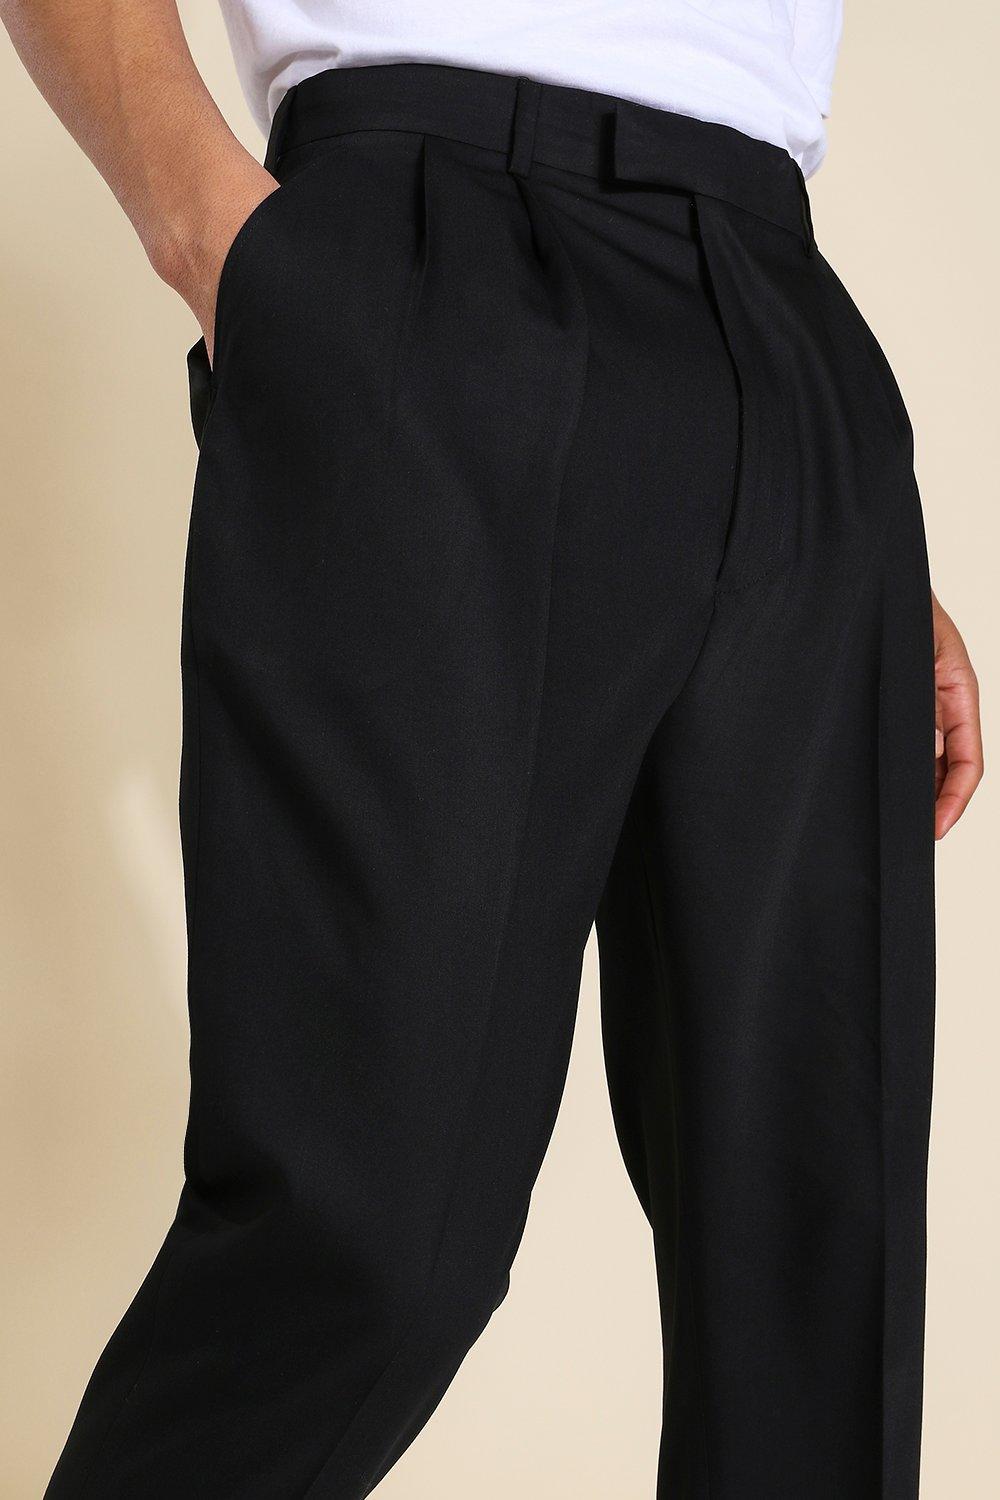 Empire waist peg trousers (new fabric options available) – Scott